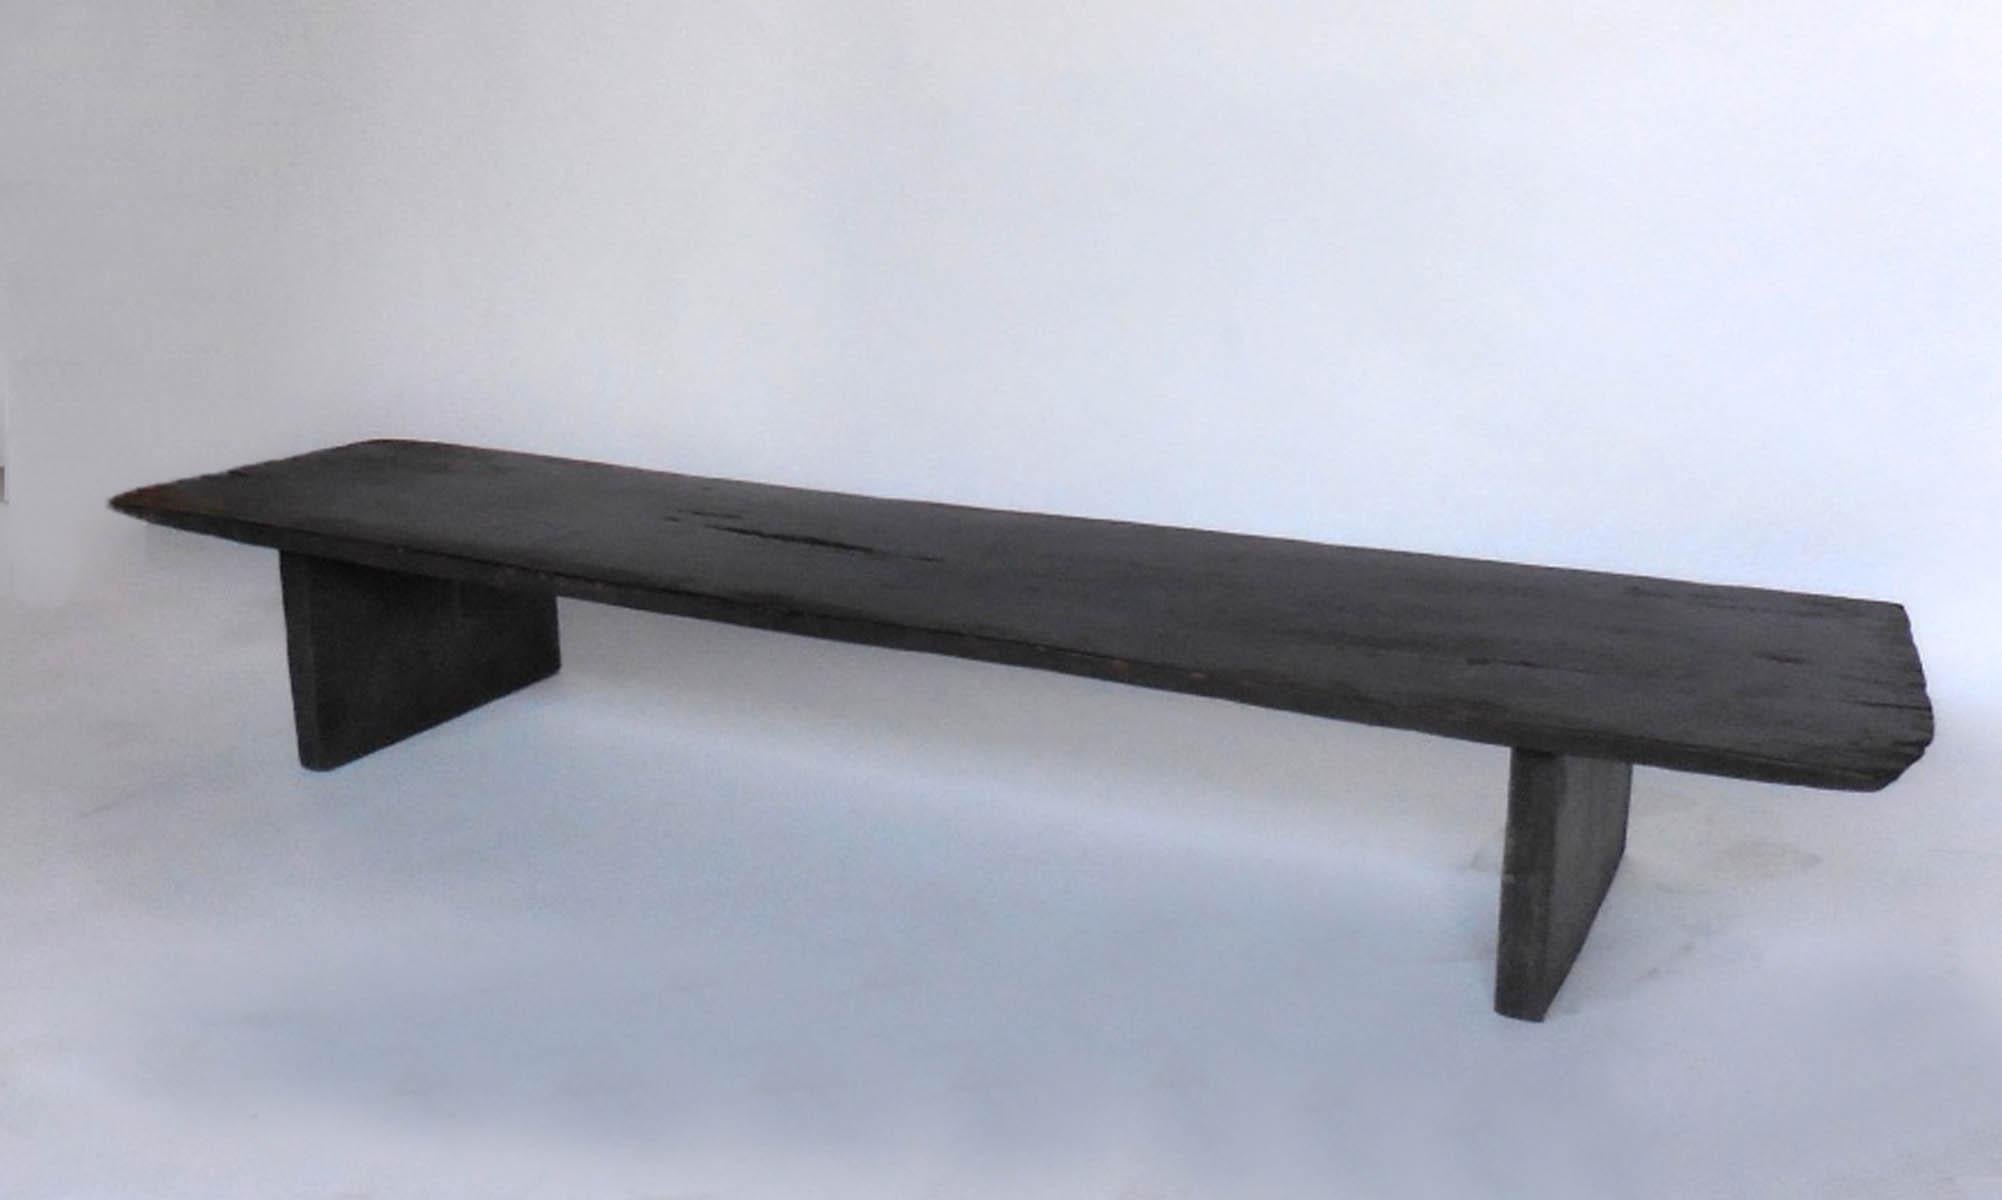 Axel Vervoordt style low coffee table made from 19th century one wide board plank in a dark almost ebony color. Beautiful patina, modern lines. Great low coffee table or console or bench.